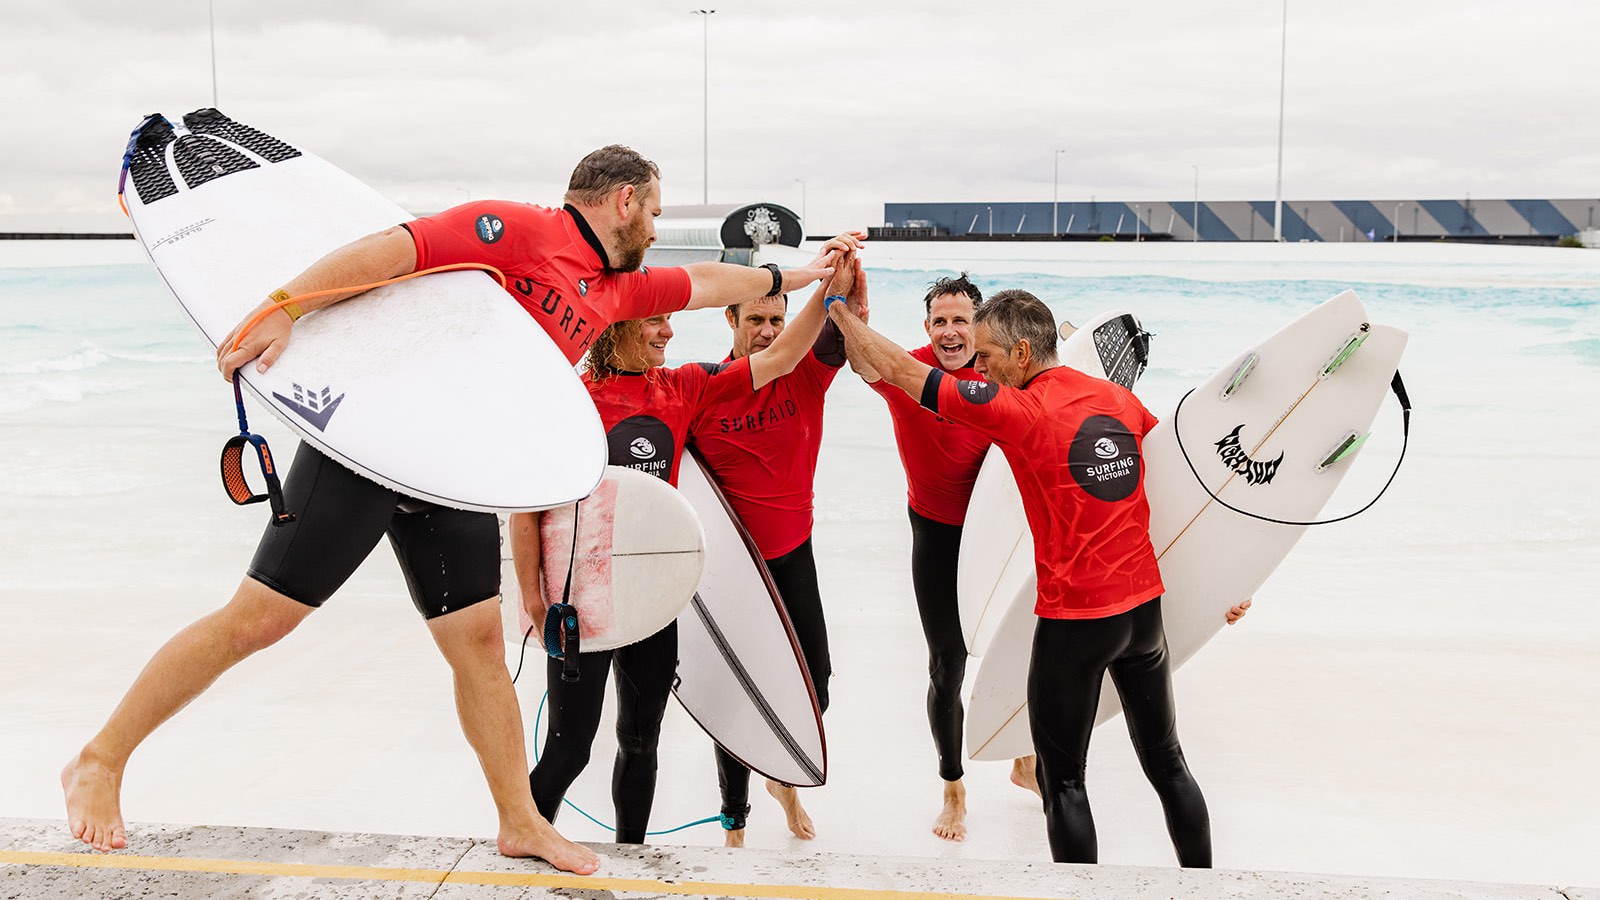 surfaid cup 2022 at the urbnsurf wave pool